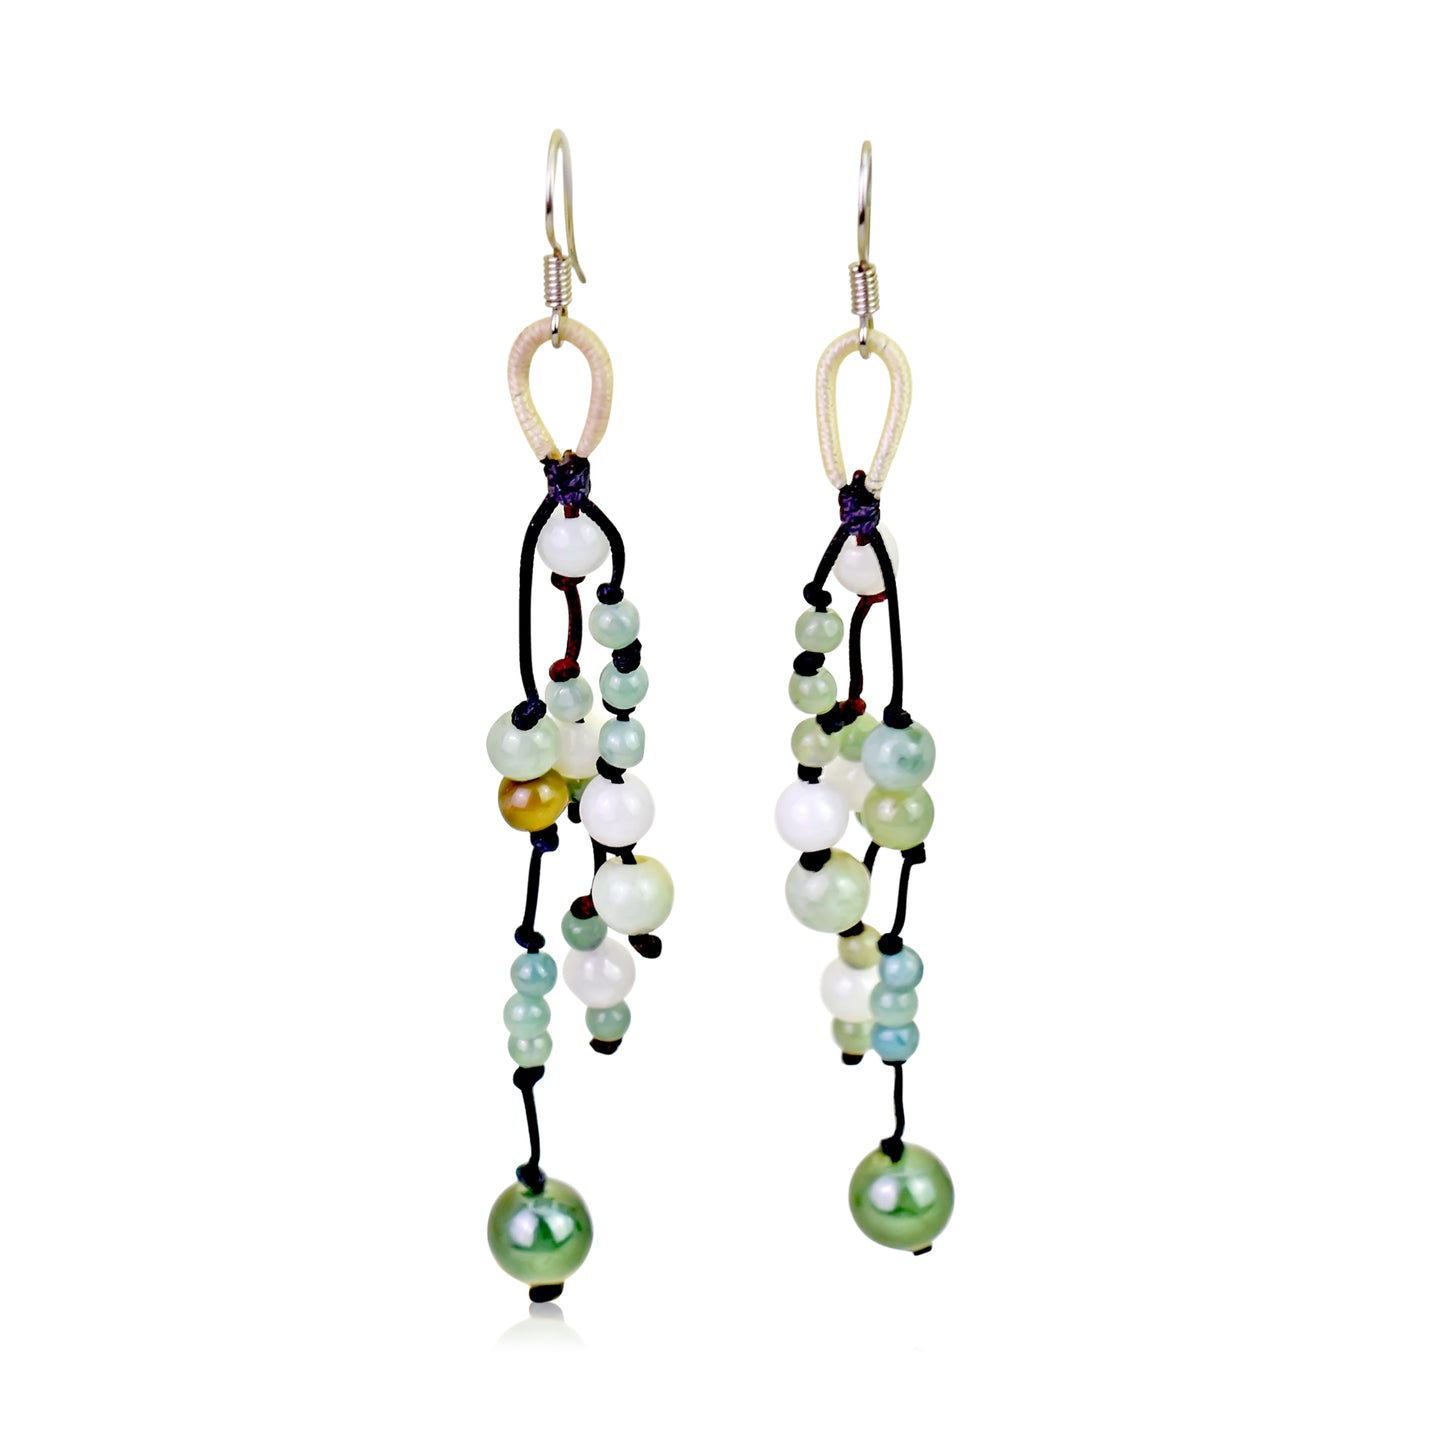 Add Some Colors and Dangle with this Breathtaking Jade Beads Earrings made with Black Cord